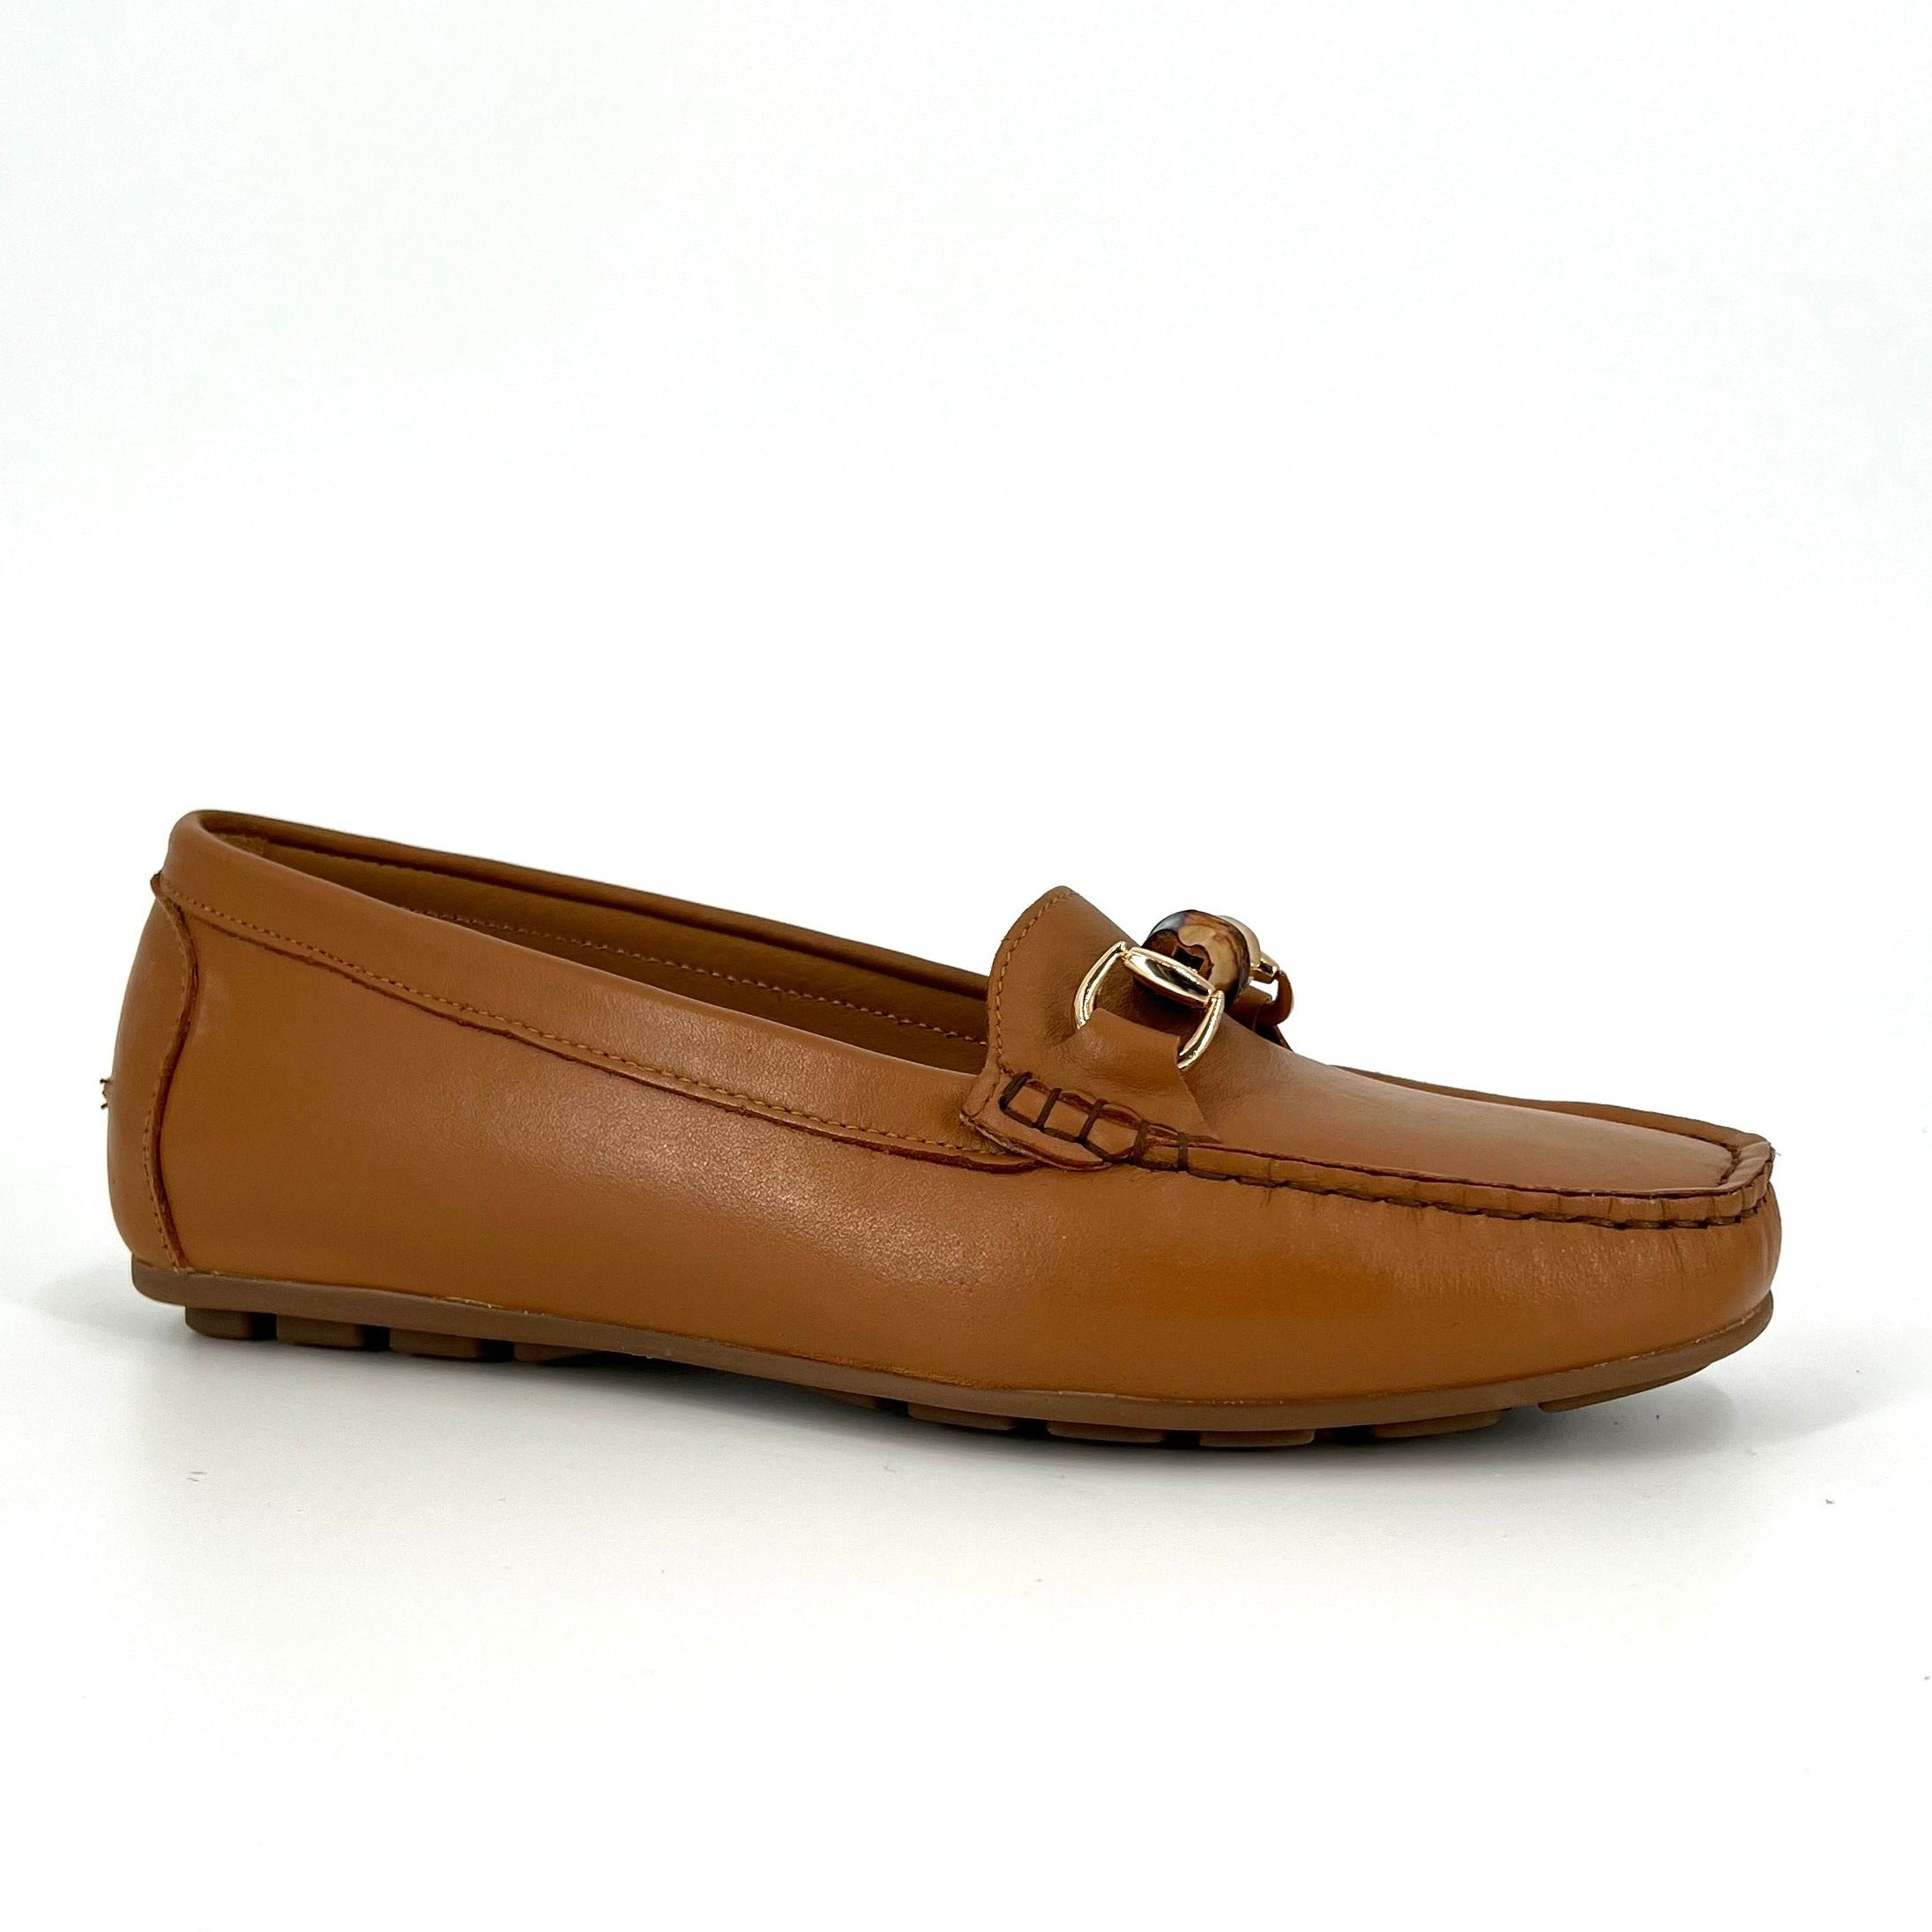 The Moccasin with Bamboo Bit in Tan